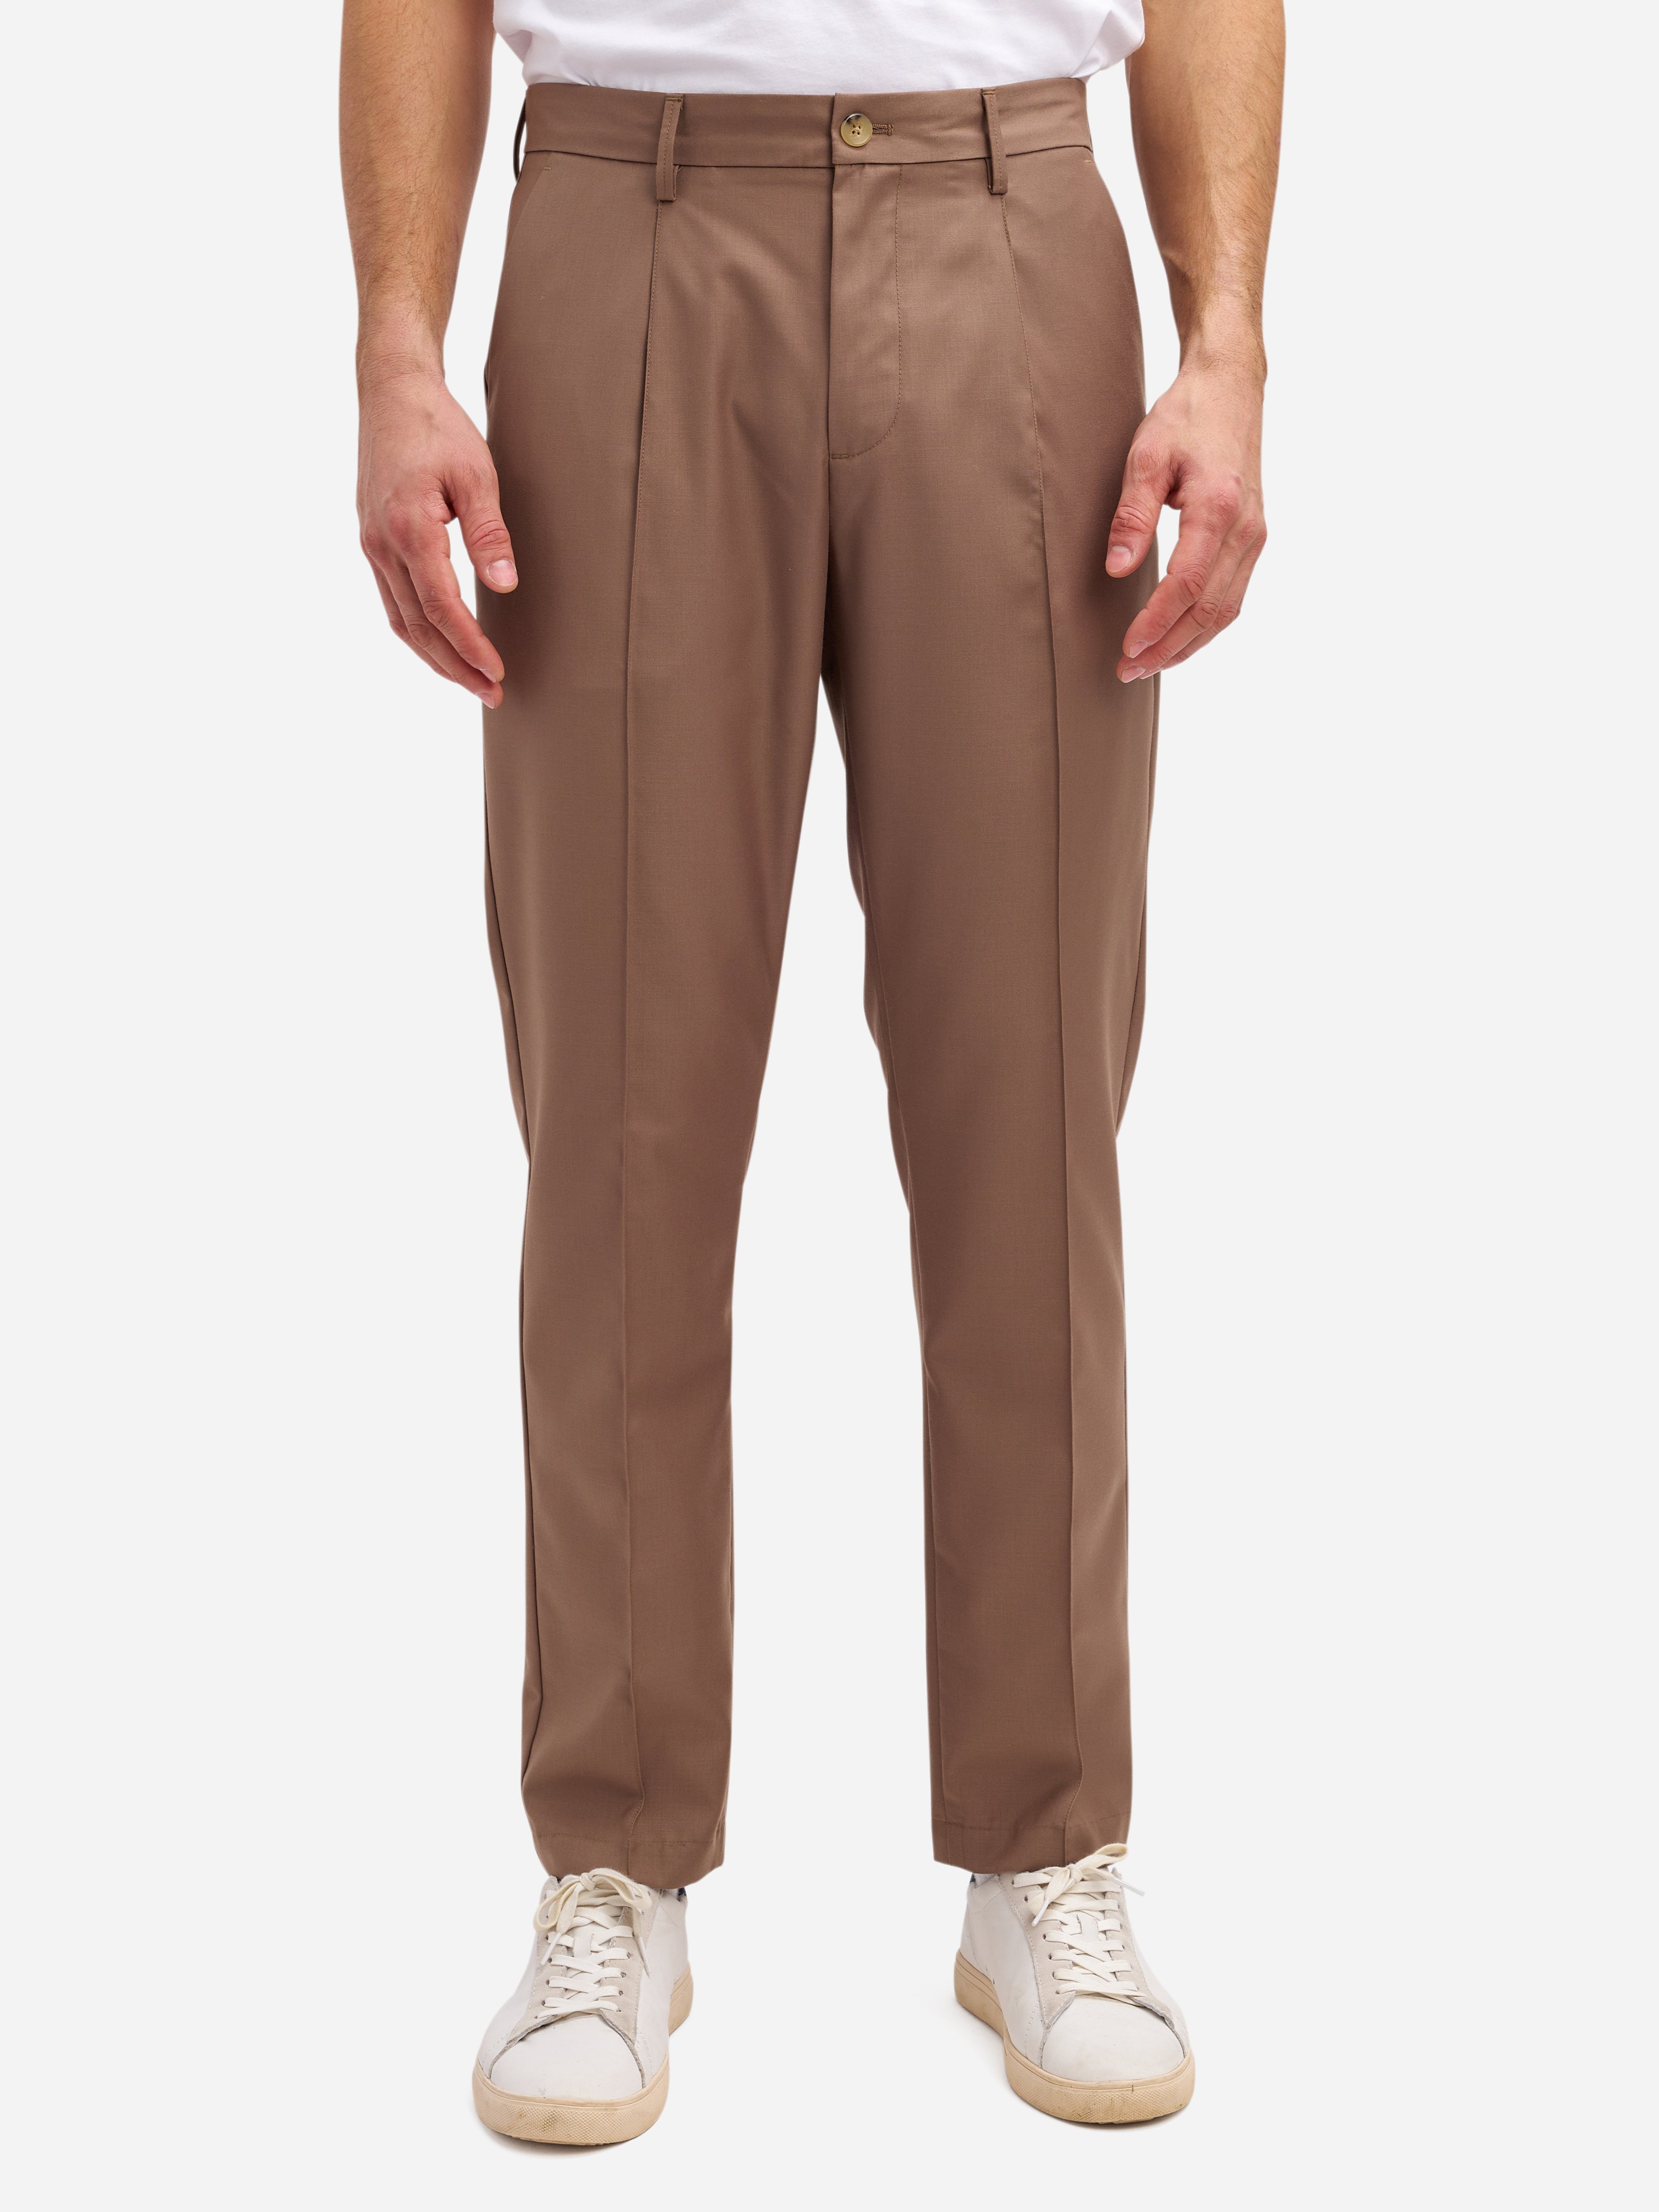 Brindle Niles Twill Trousers Men's O.N.S SS23